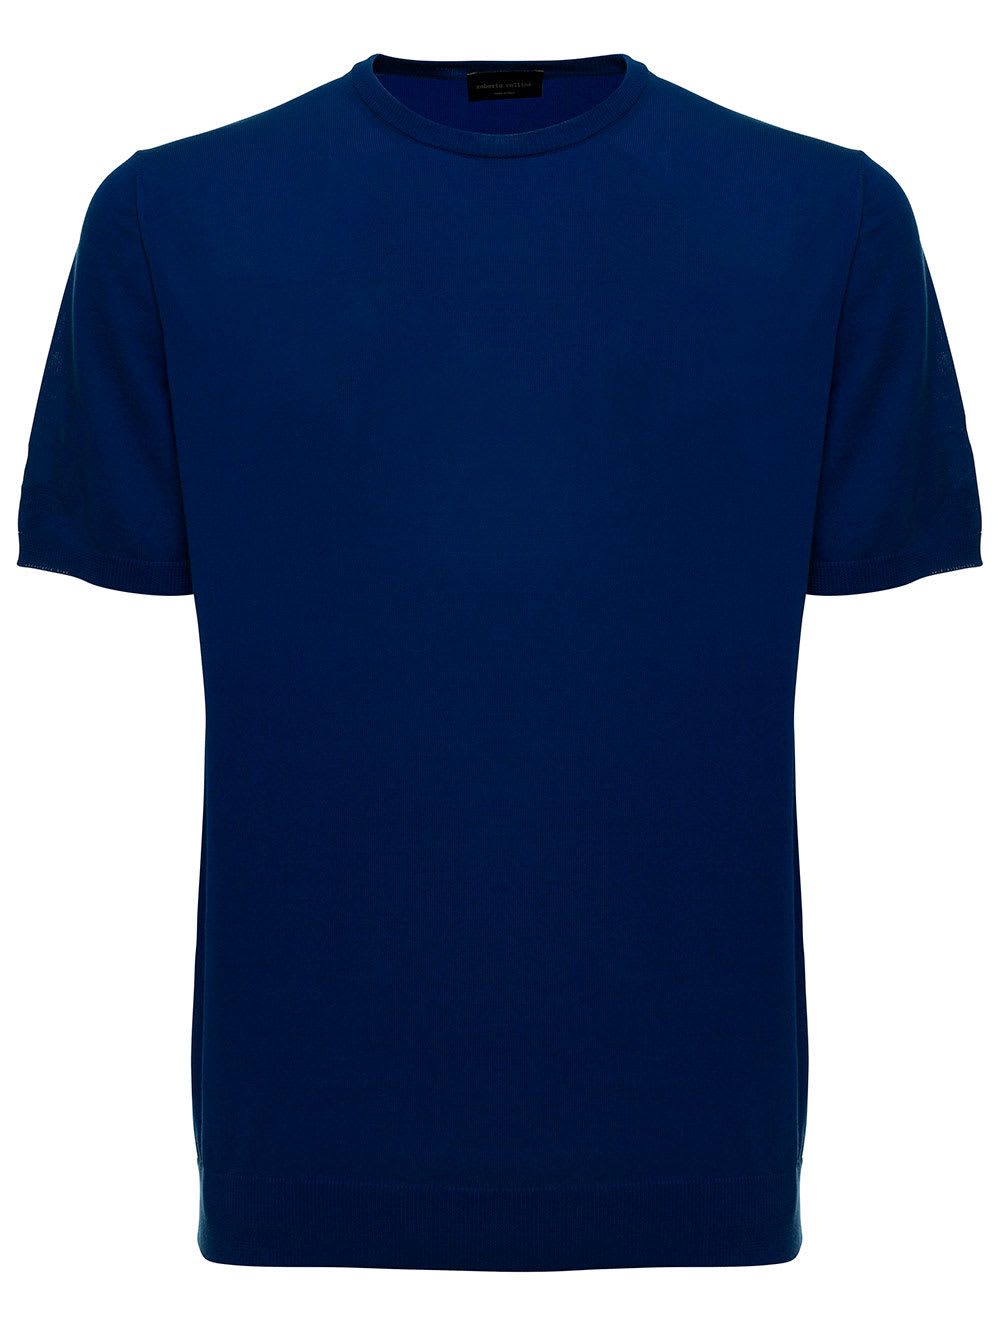 Roberto Collina Blue Knitted Tee